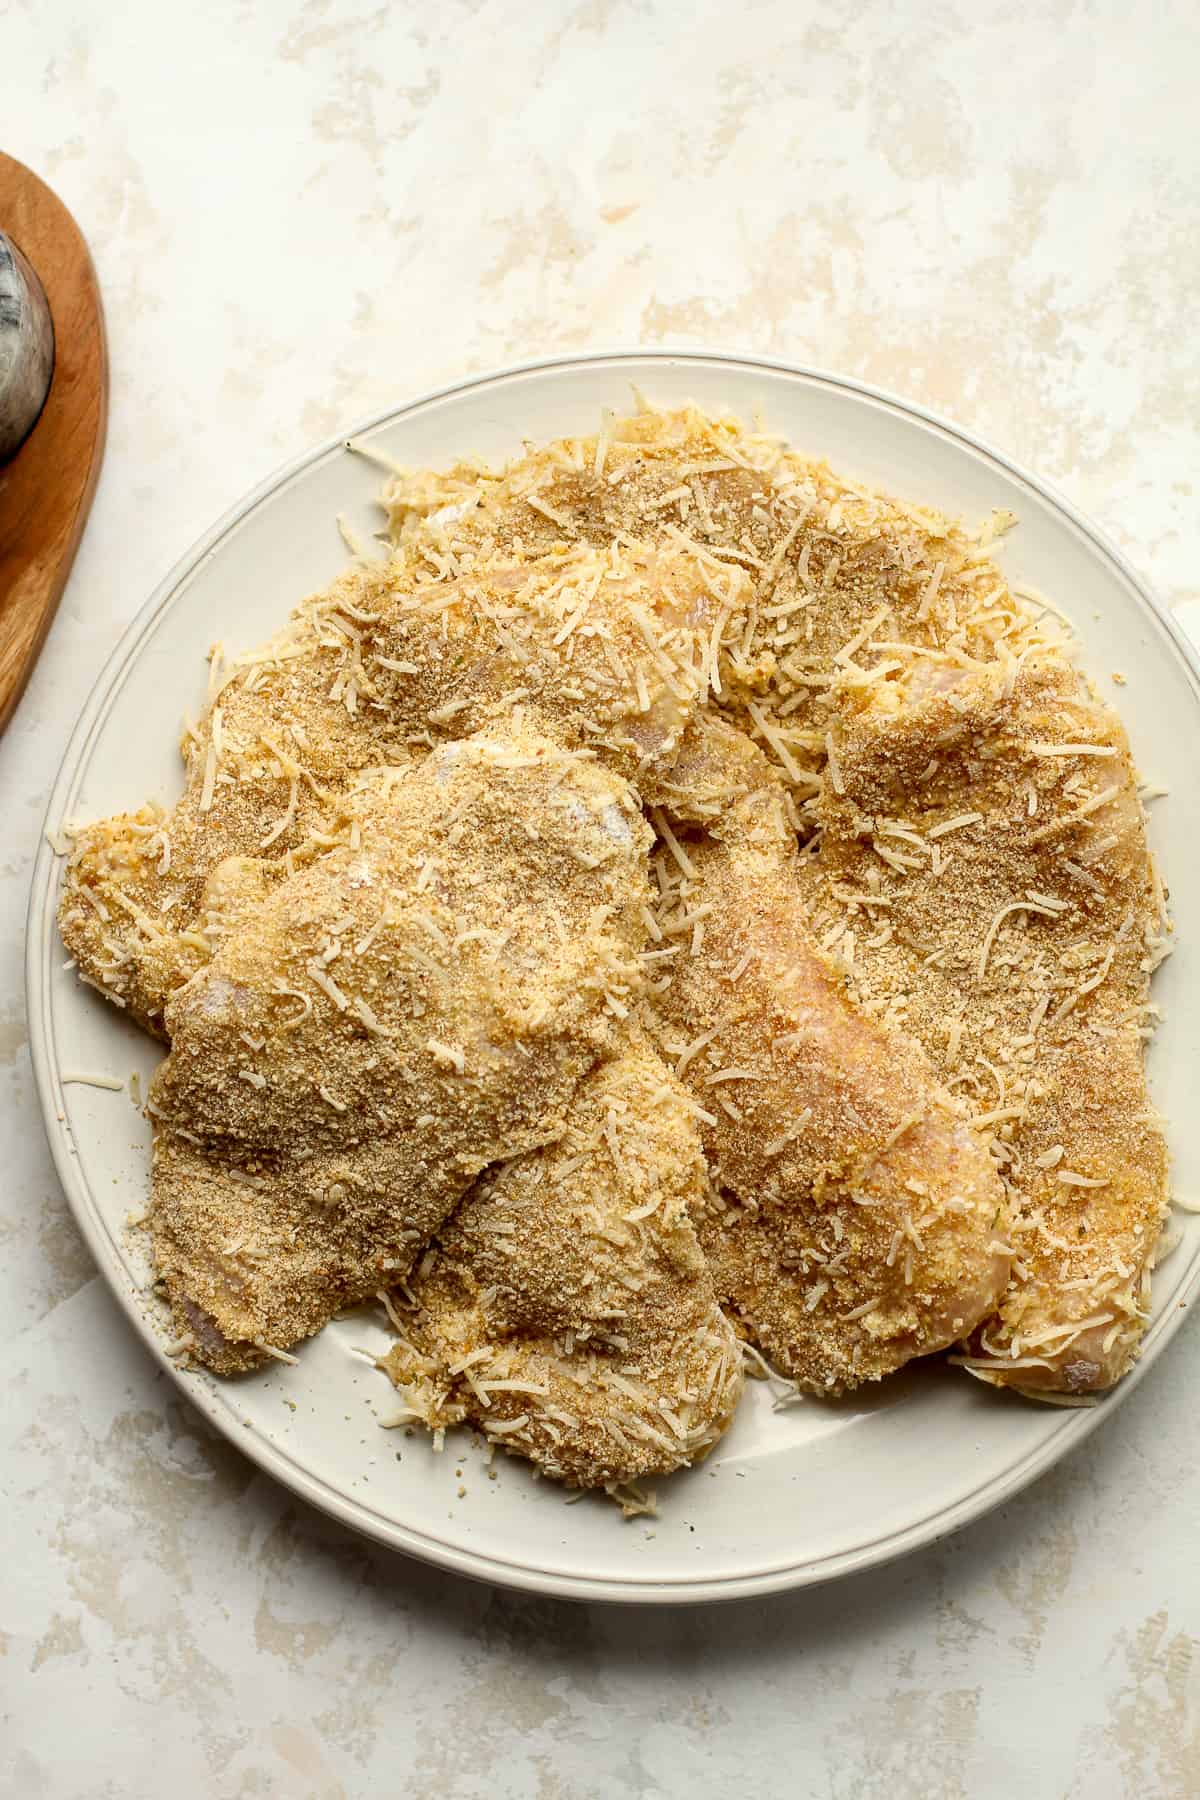 A plate of the breaded chicken breasts.